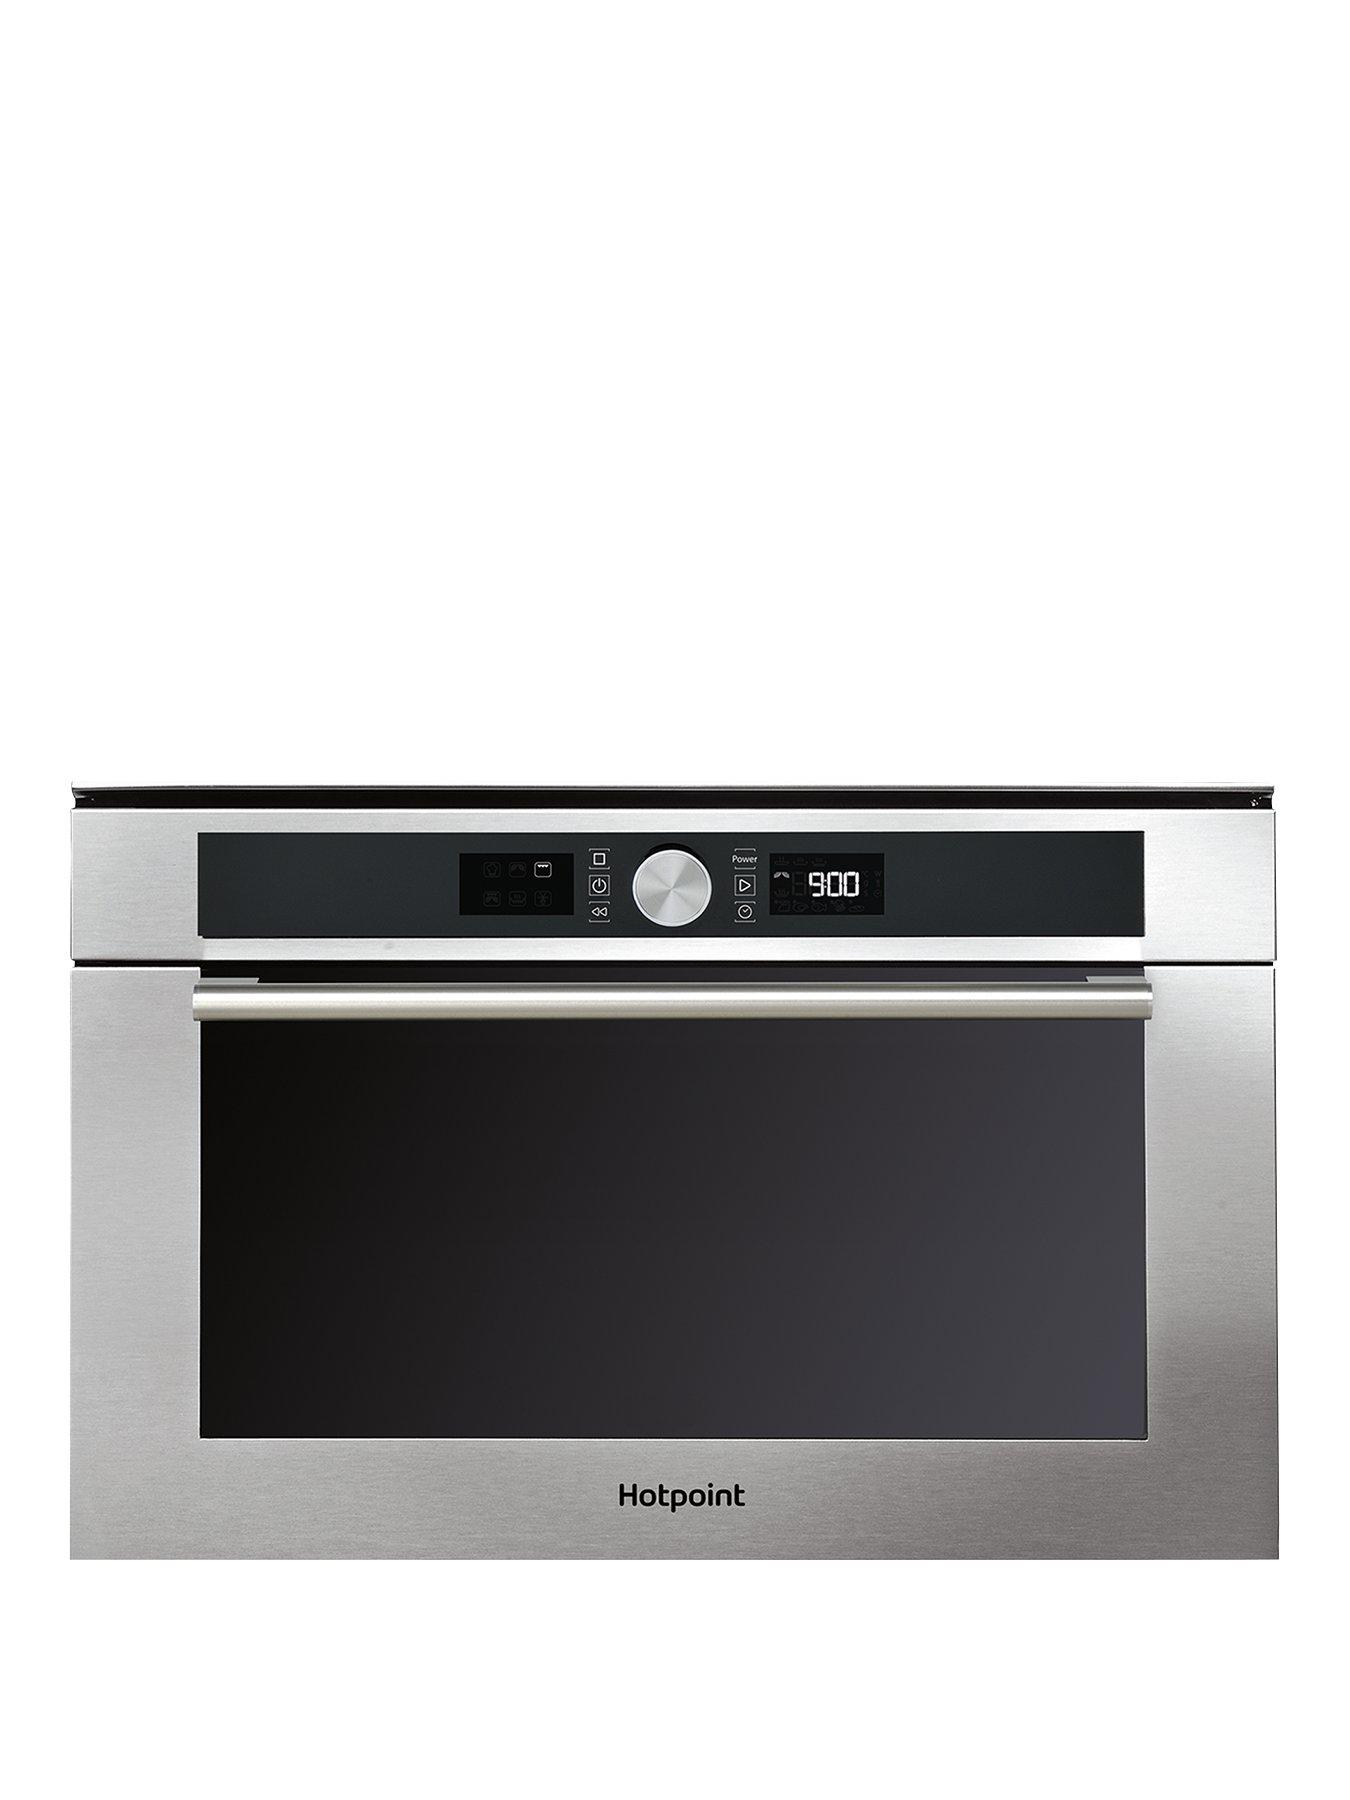 Hotpoint Class 4 Md454Ixh 60Cm Built-In Microwave Oven With Grill And Optional Installation – Stainless Steel – Microwave With Installation